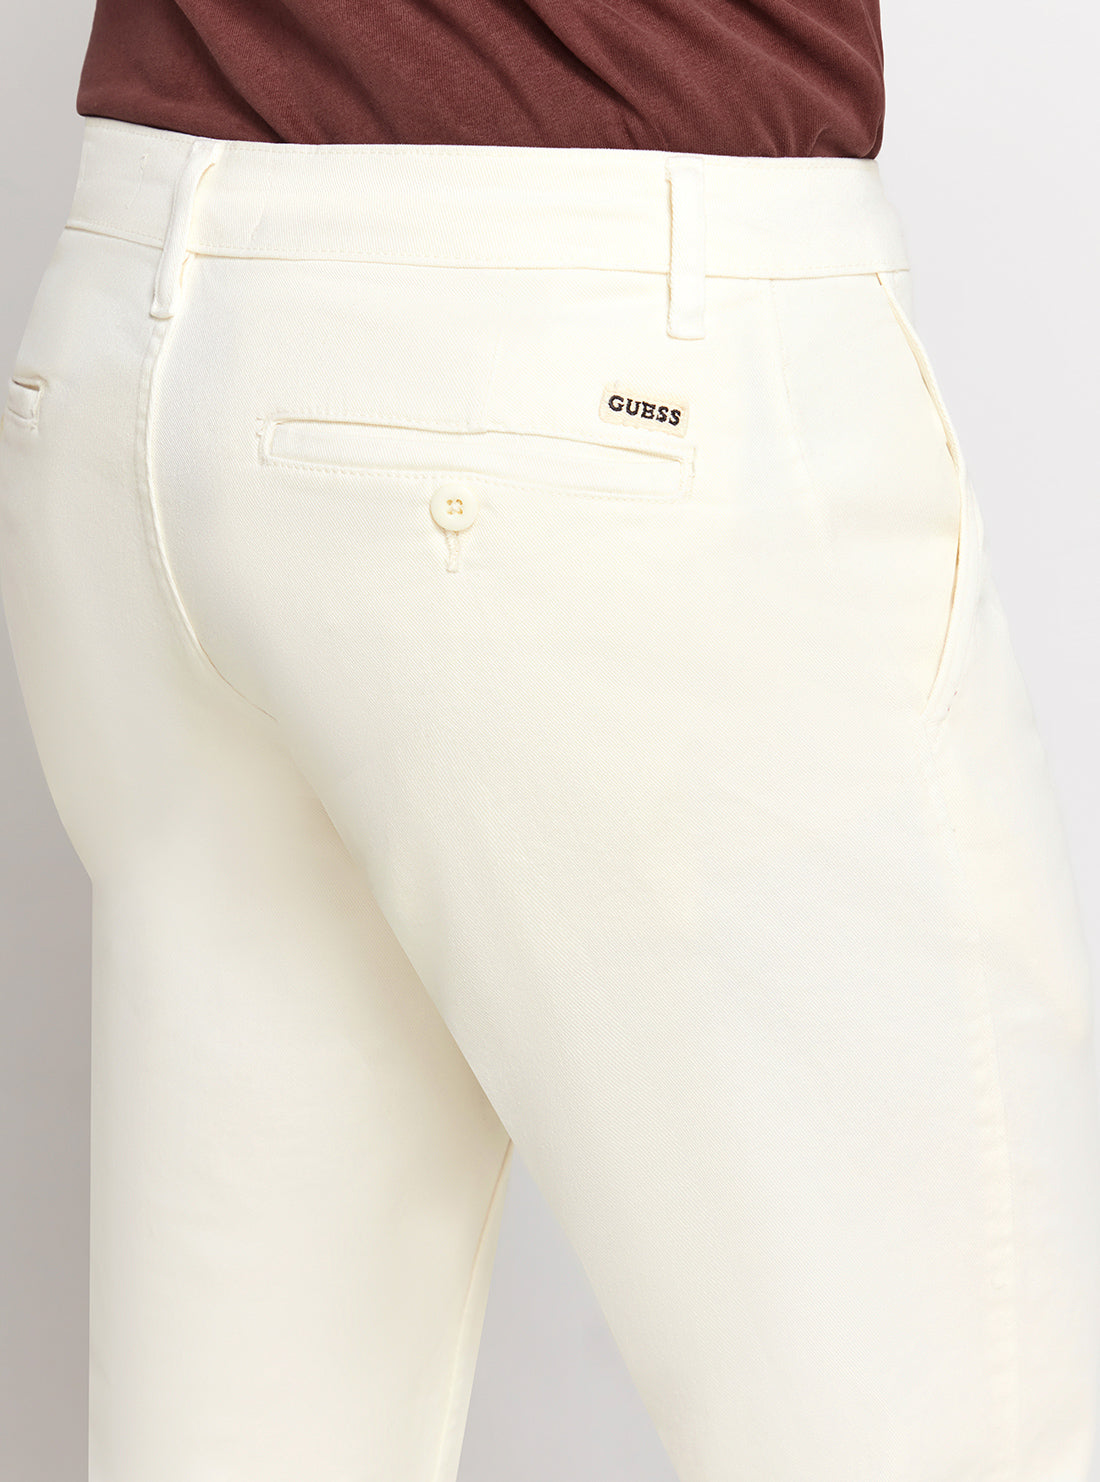 GUESS White Low-Rise Straight-leg Angel Chino Pants close up view